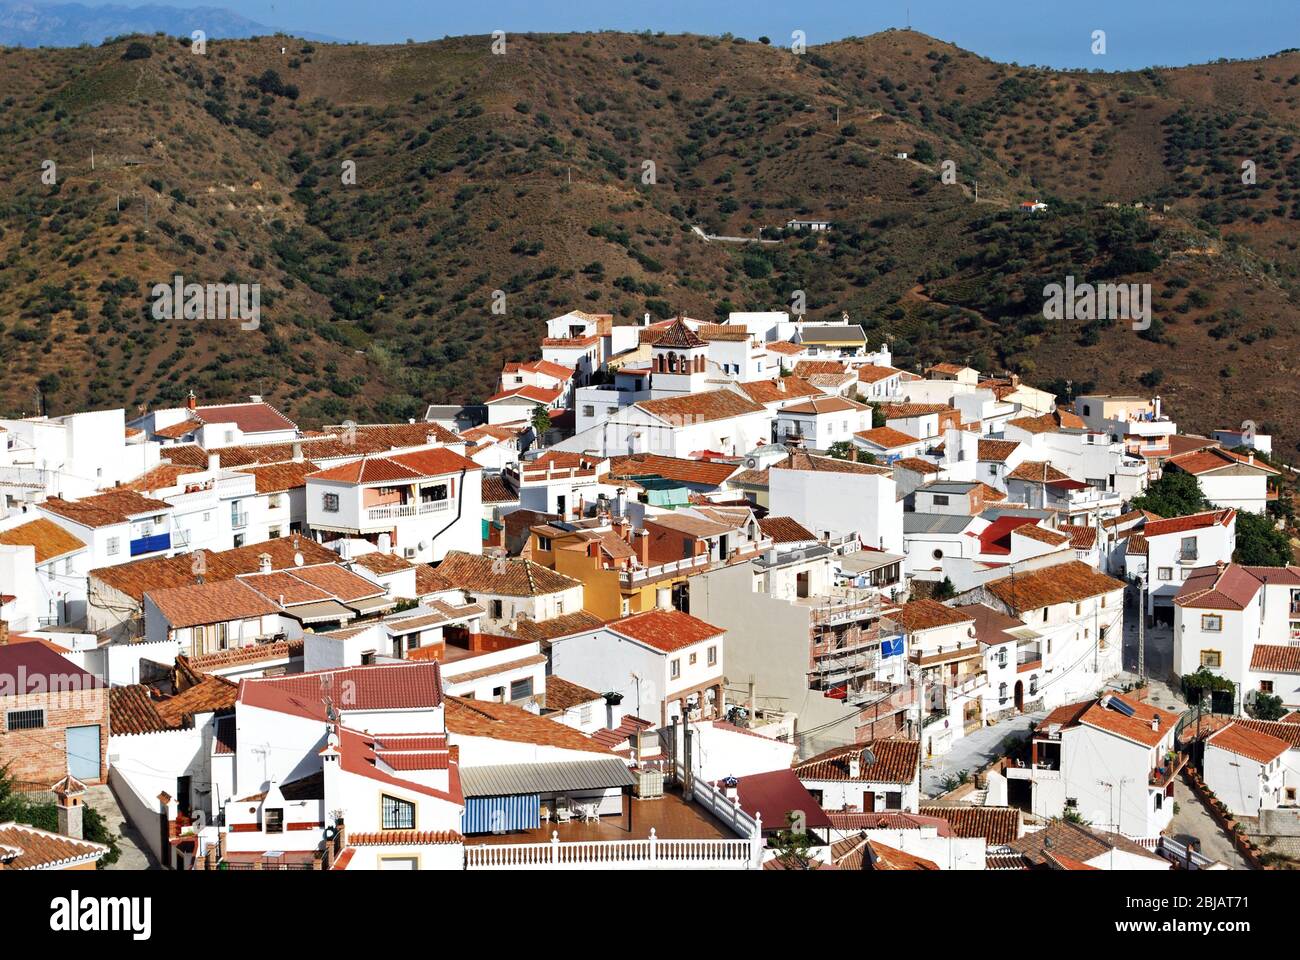 Elevated view of the whitewashed village (pueblo blanco), Moclinejo, Costa del Sol, Malaga Province, Andalucia, Spain. Stock Photo